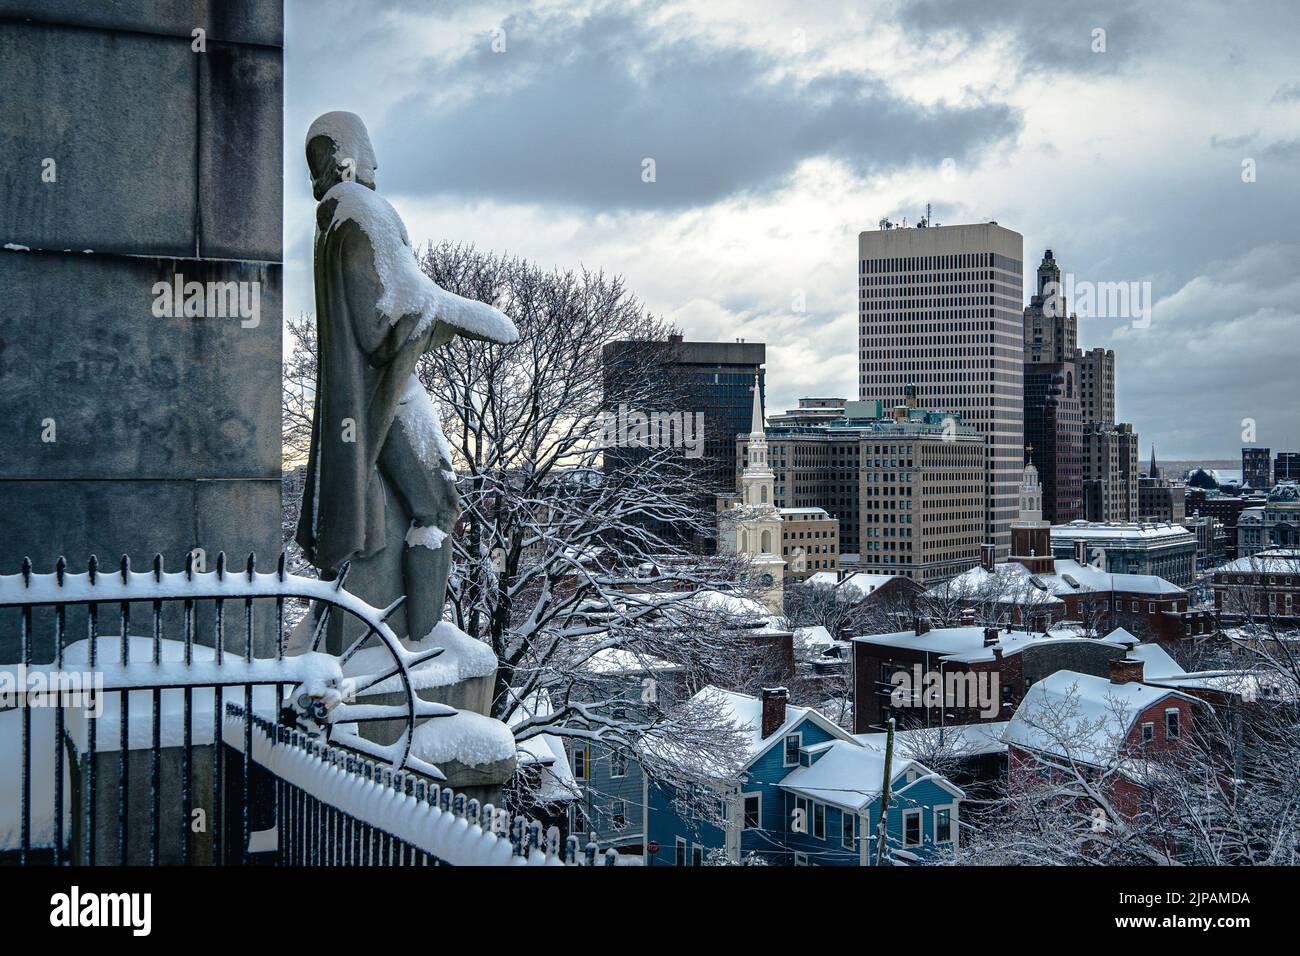 The statue of Roger Williams facing urban scenery of modern buildings,  Prospect Terrace, Providence, Rhode Island Stock Photo